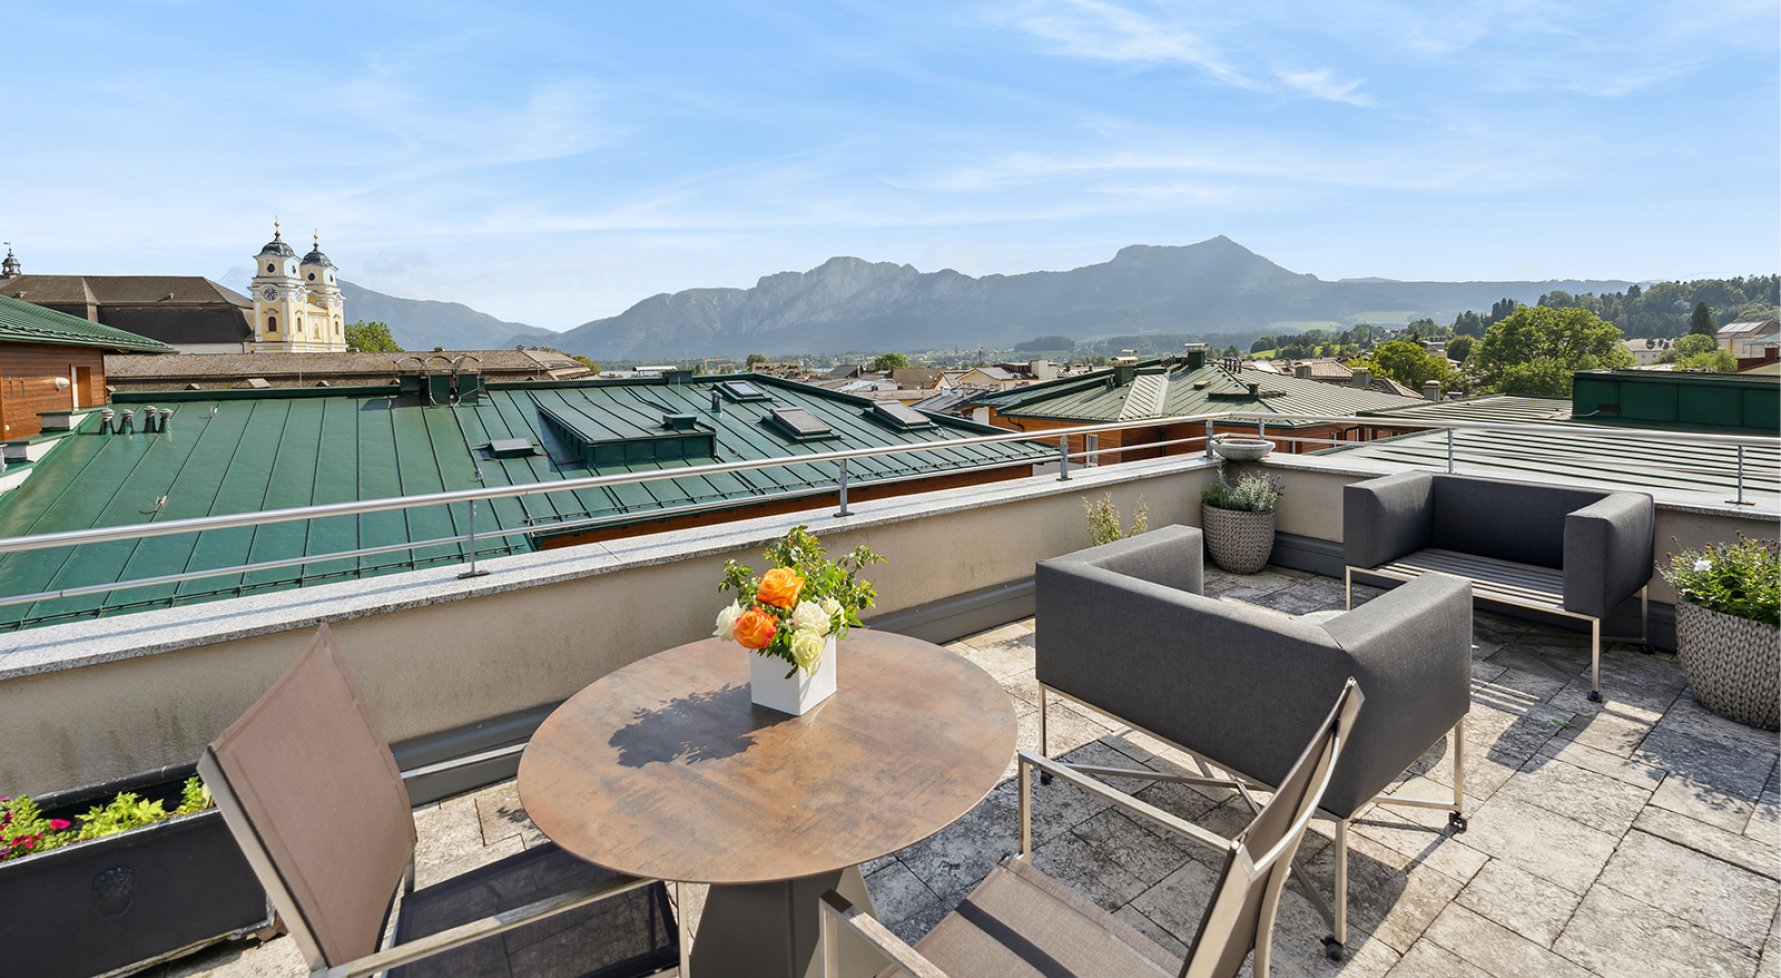 Property in 5310 Salzkammergut - Mondsee : Mondsee – high above the basilica! Stylish penthouse with spectacular 360° views - picture 1